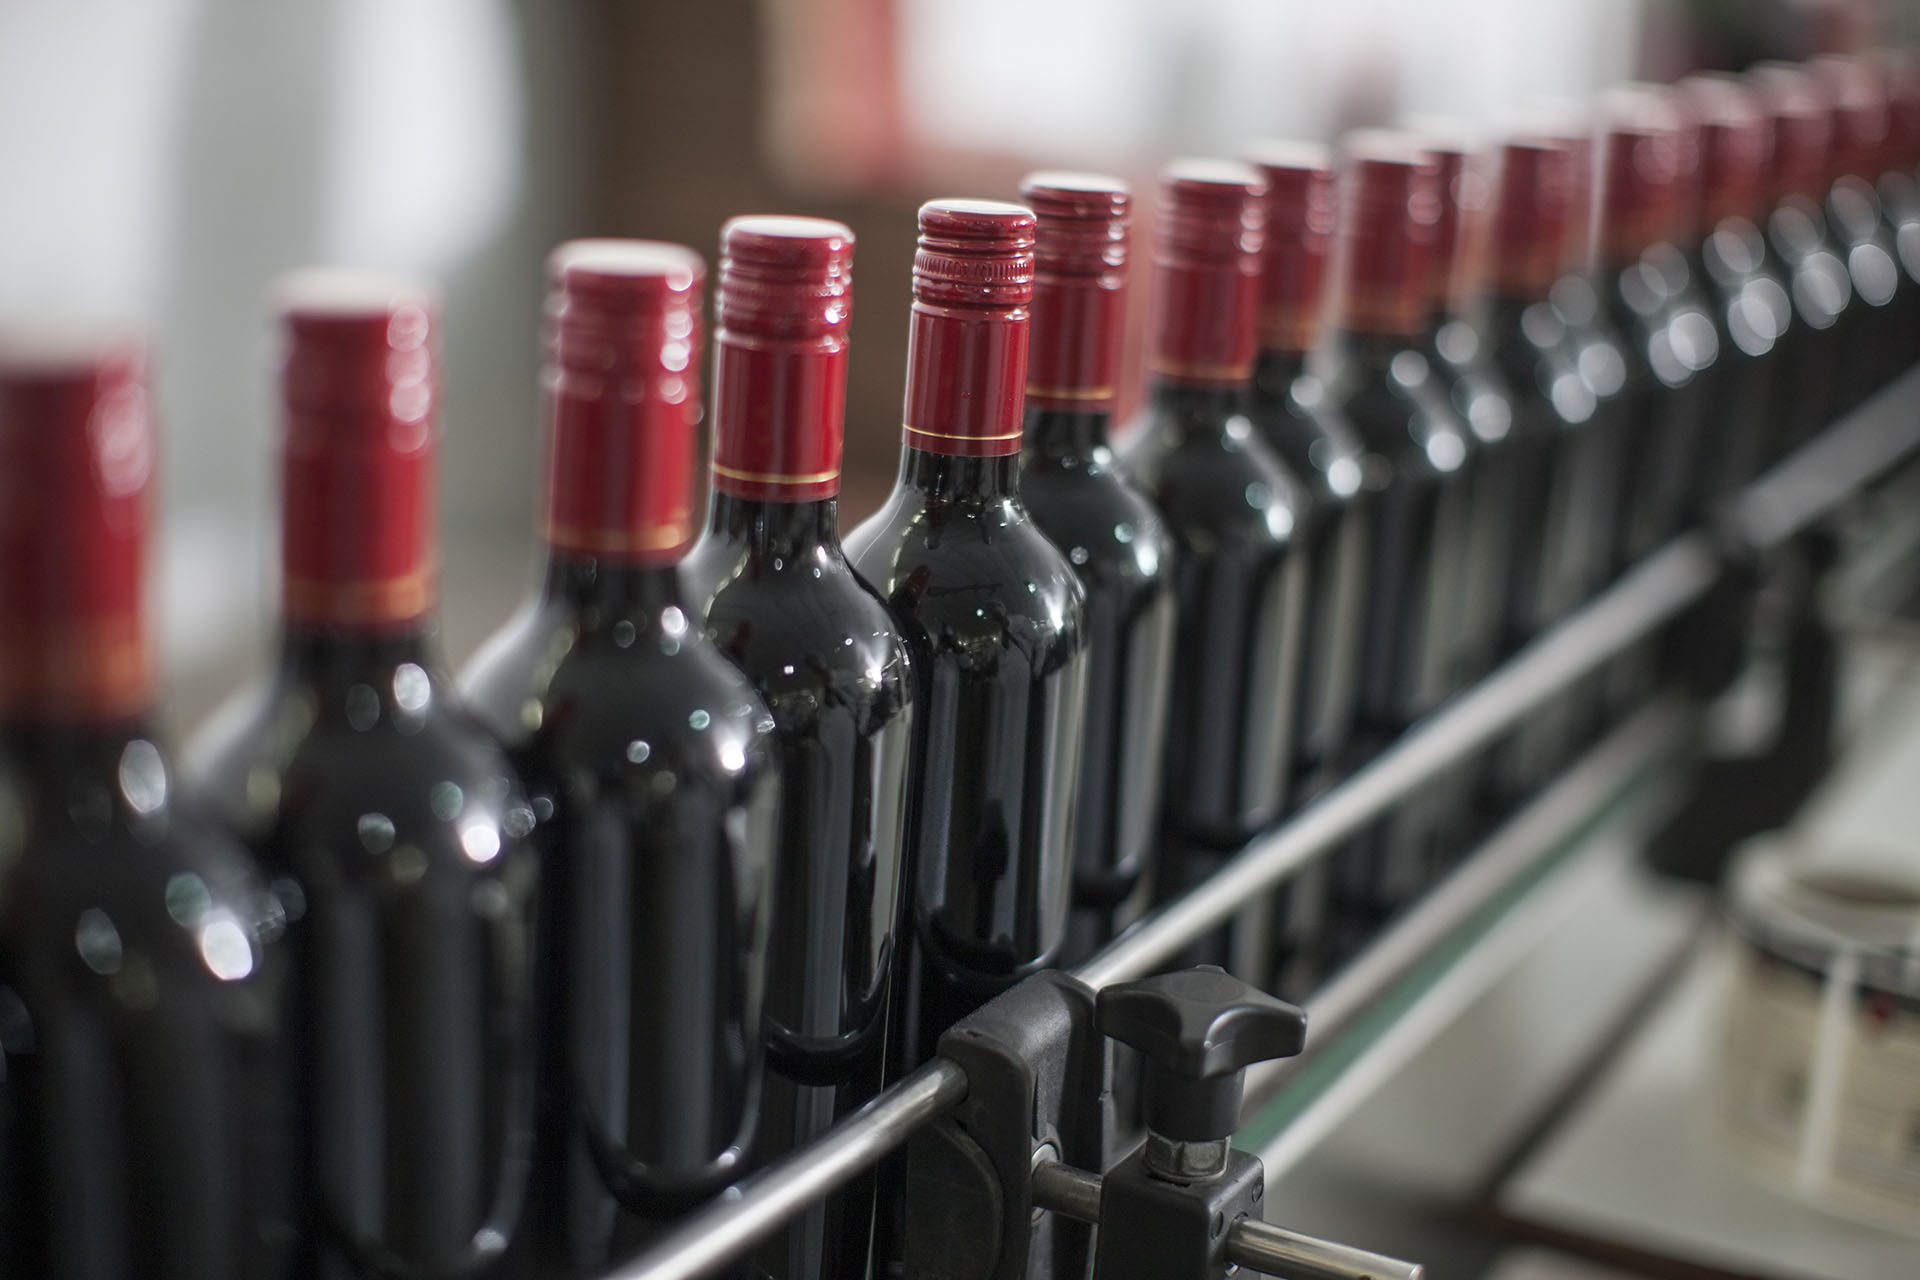 The Technology Development in the Wine Industry